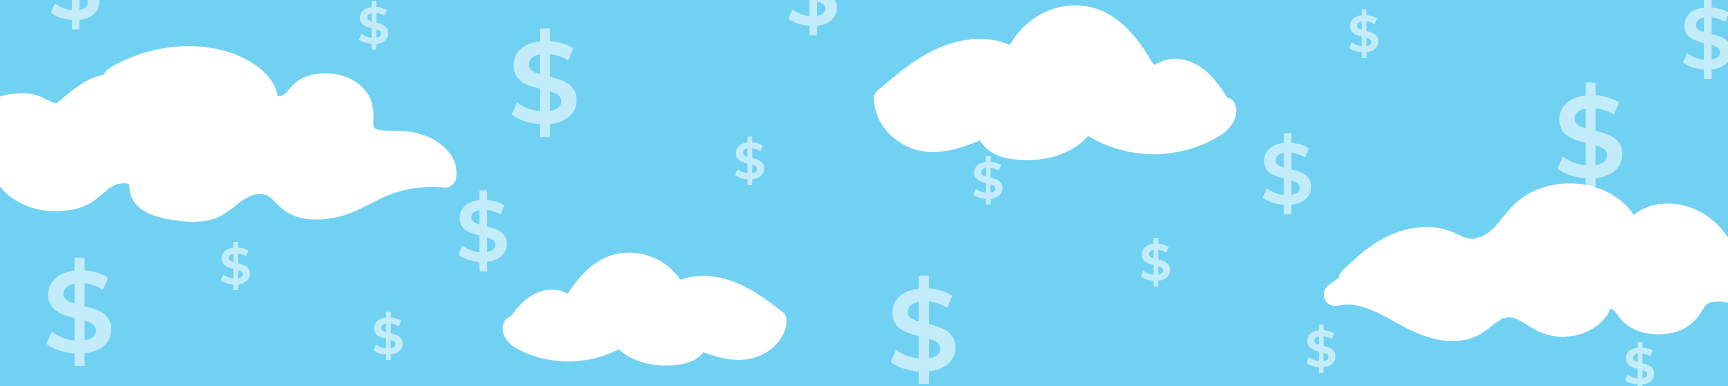 The image depicts a graphic of money signs floating in the blue sky amongst clouds. 